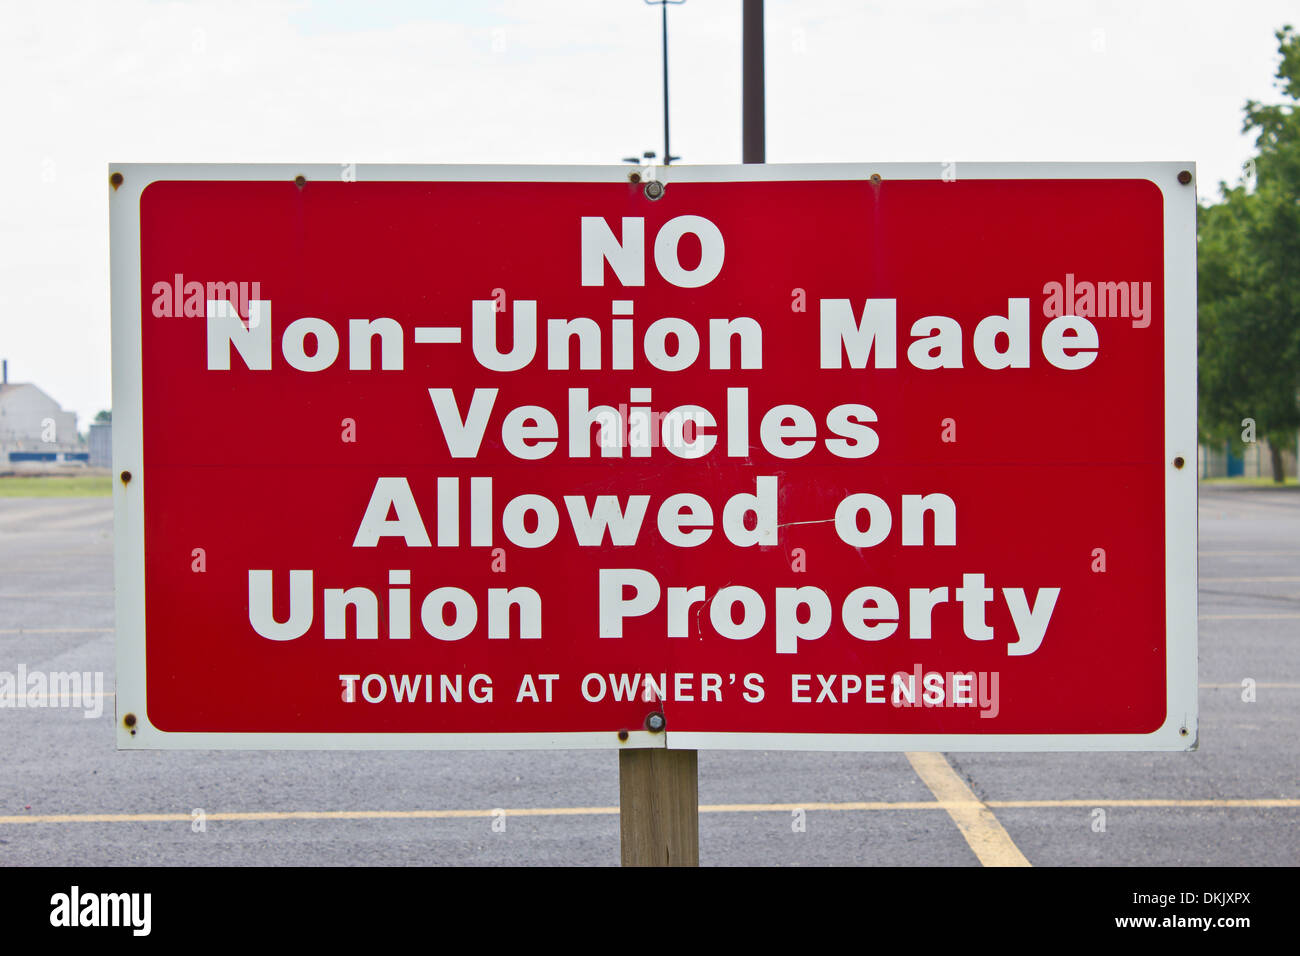 No Non-Union Made Vehicles Allowed - Sign Showing no Love for Non-Union Made Cars Stock Photo